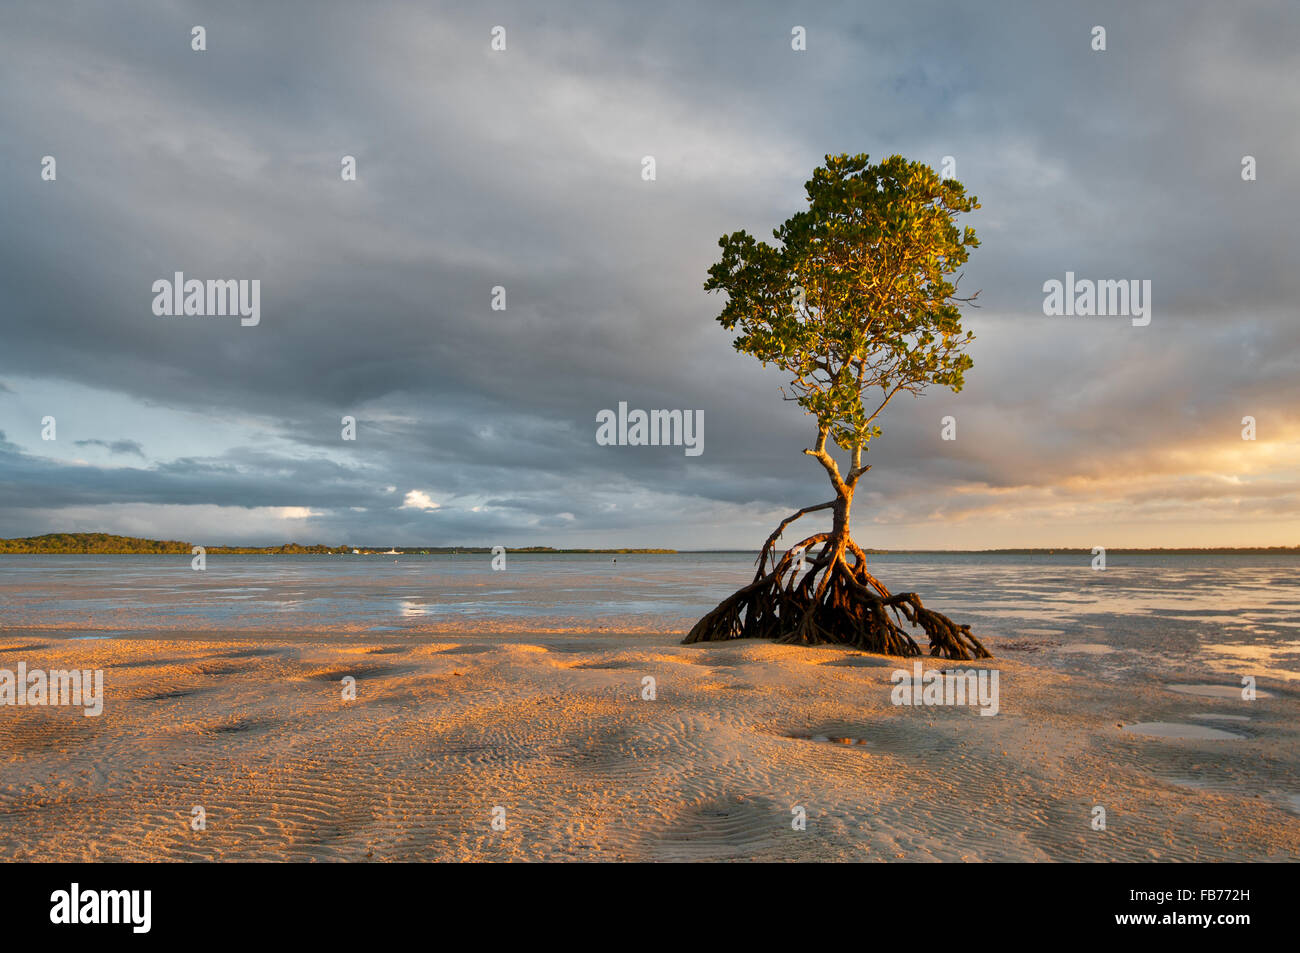 Evening light on a mangrove tree in Pelican Bay. Stock Photo